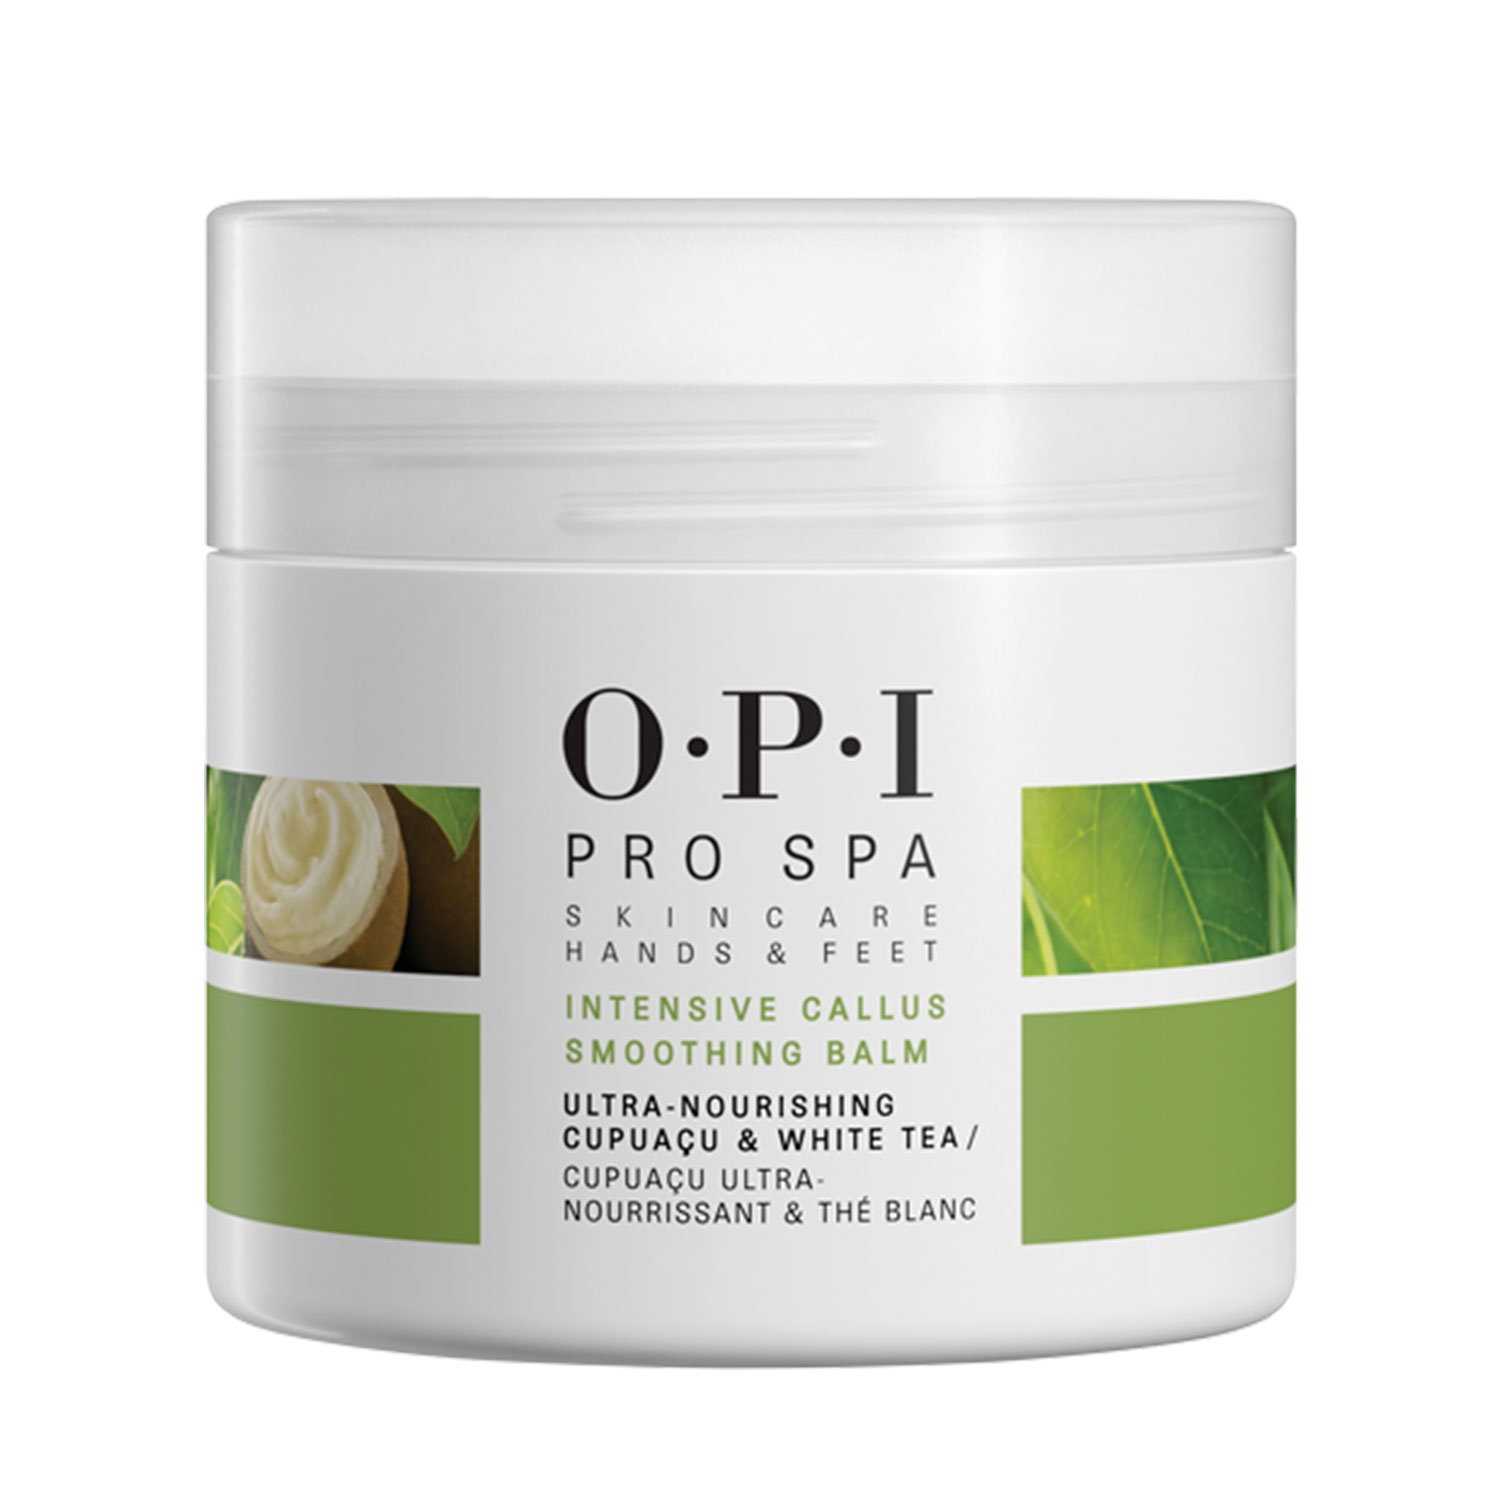 Product image from Pro Spa - Intensive Callus Smoothing Balm